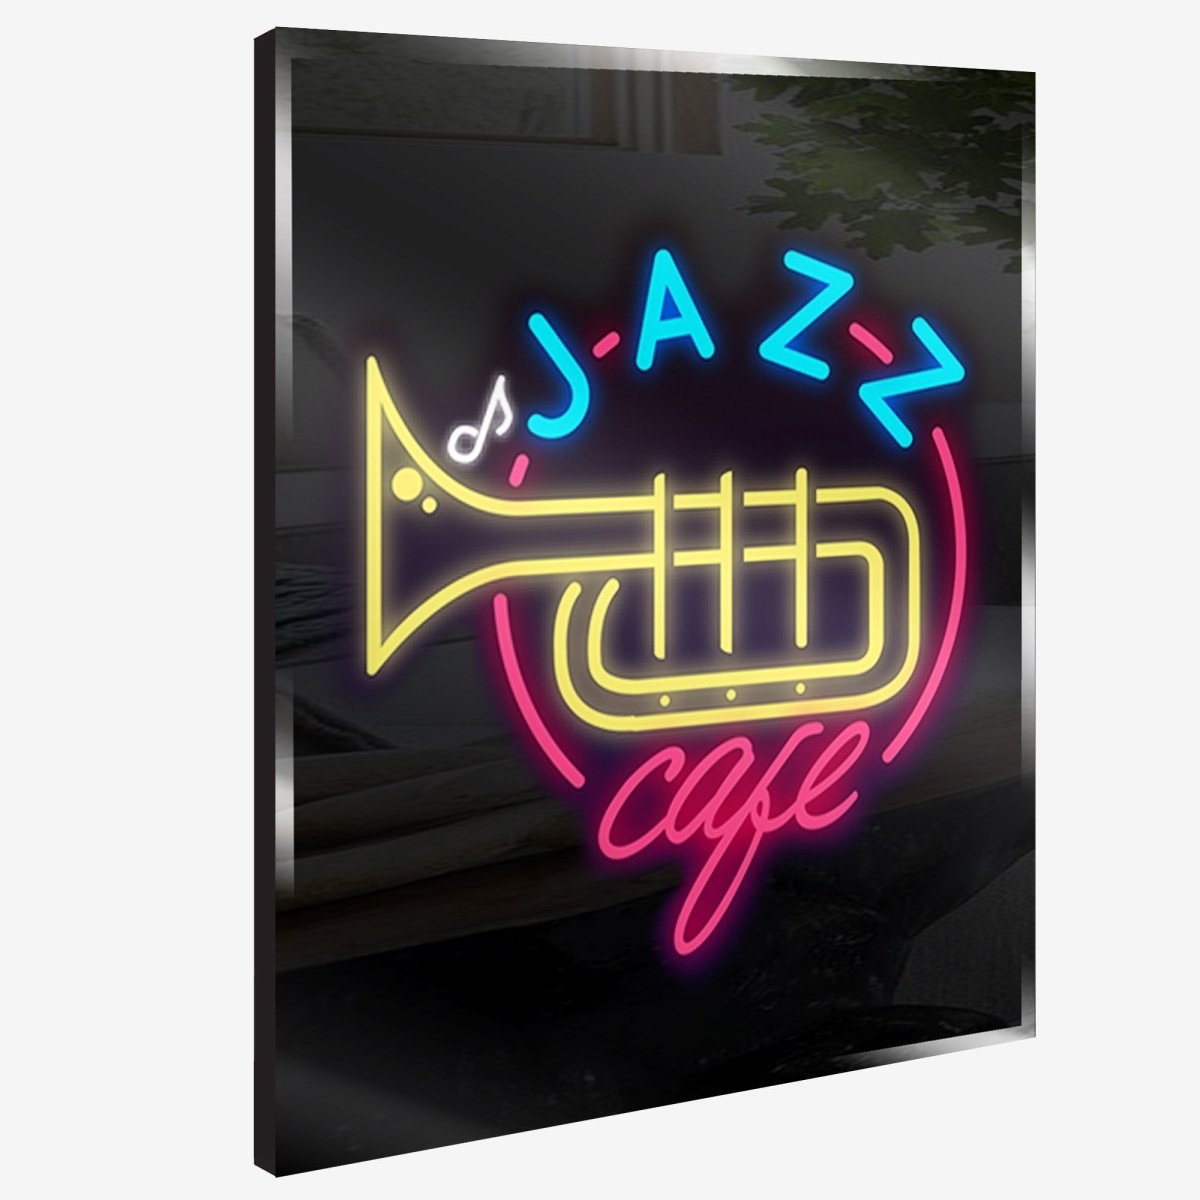 Personalized Neon Sign Jazz Cafe - madaboutneon